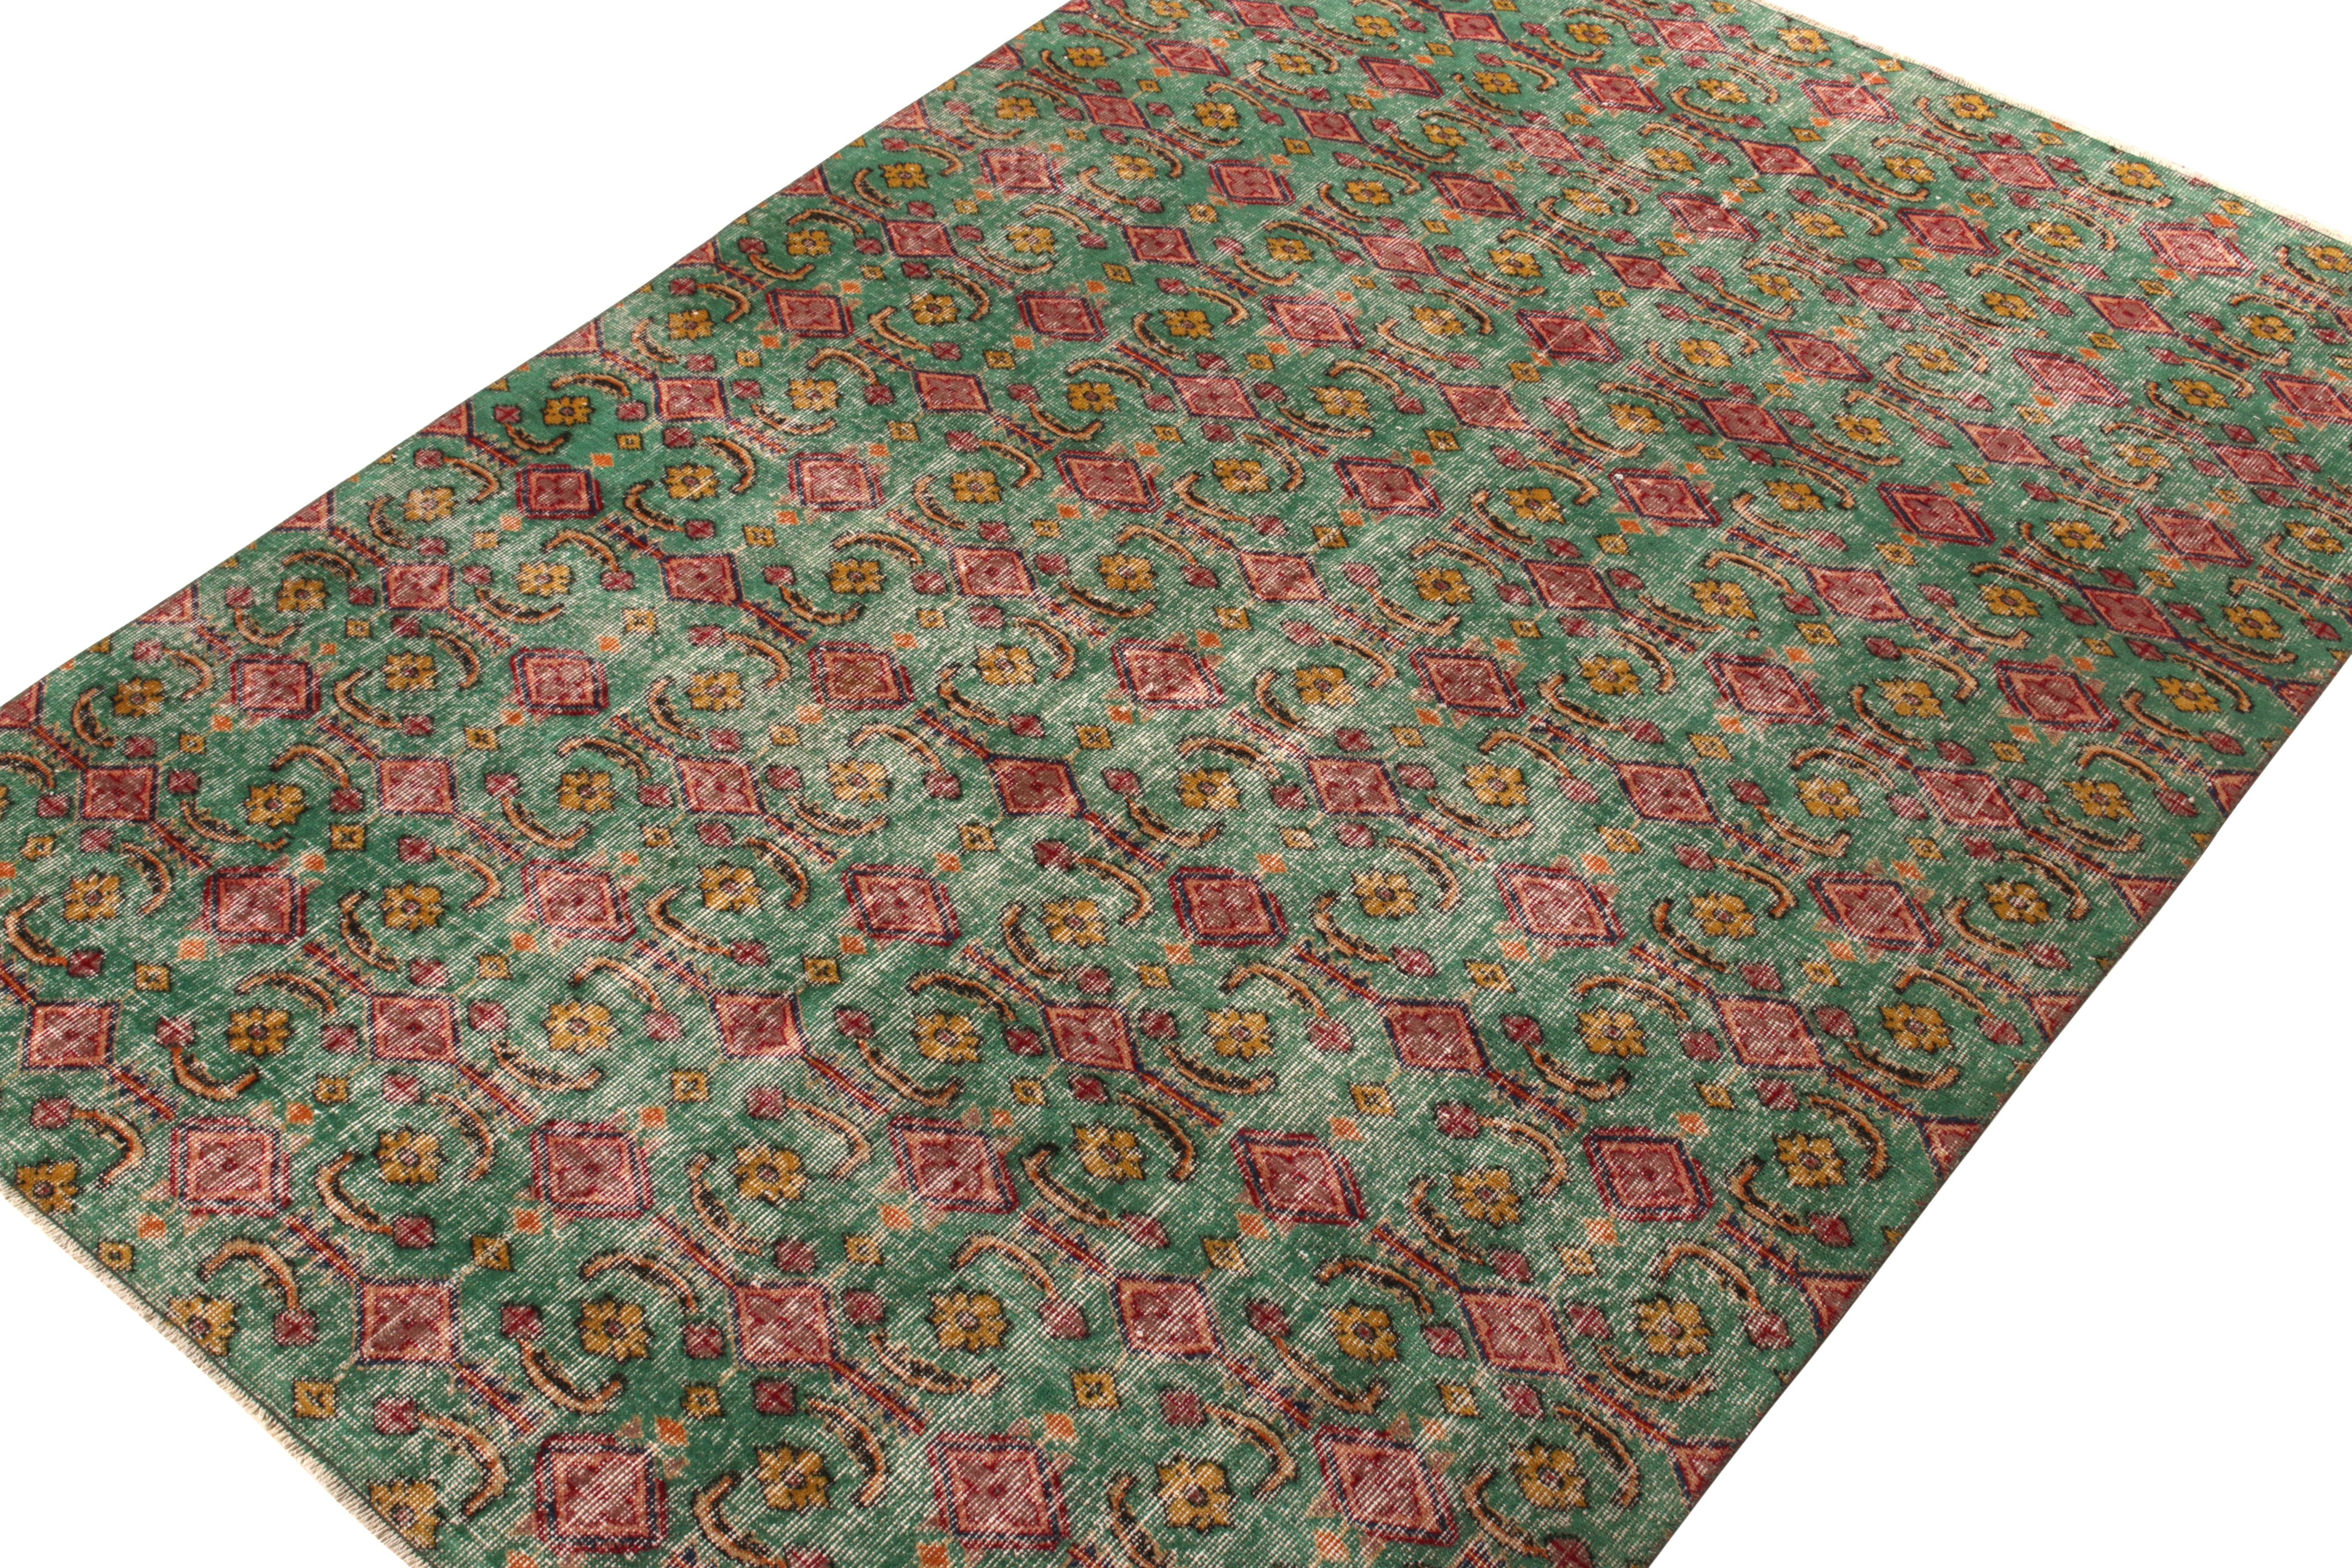 Mid-Century Modern 1960s Distressed Art Deco Rug in Green, Pink, Gold Floral Pattern by Rug & Kilim For Sale